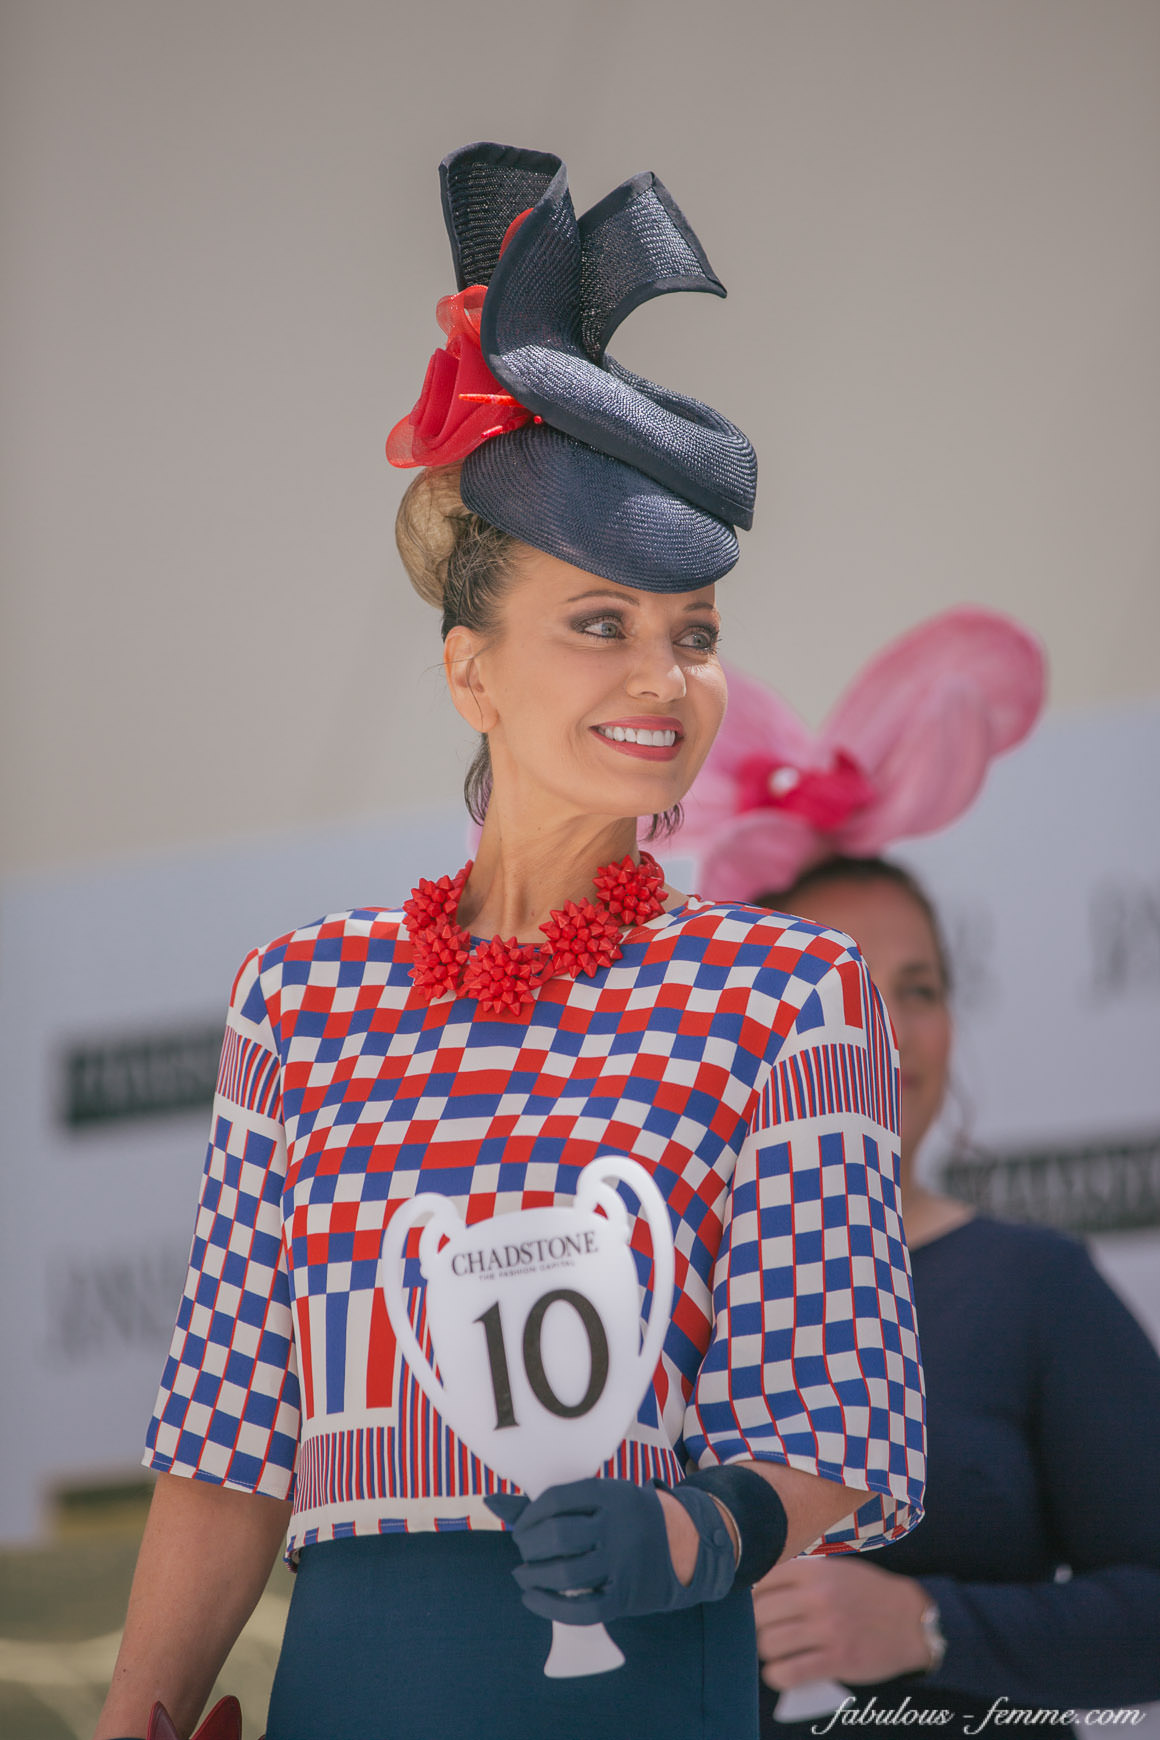 Lisa Wellings - Winner of the Fashions on the Field 2014 at Caulfield Guineas Day (40+ Stylish Ladies)